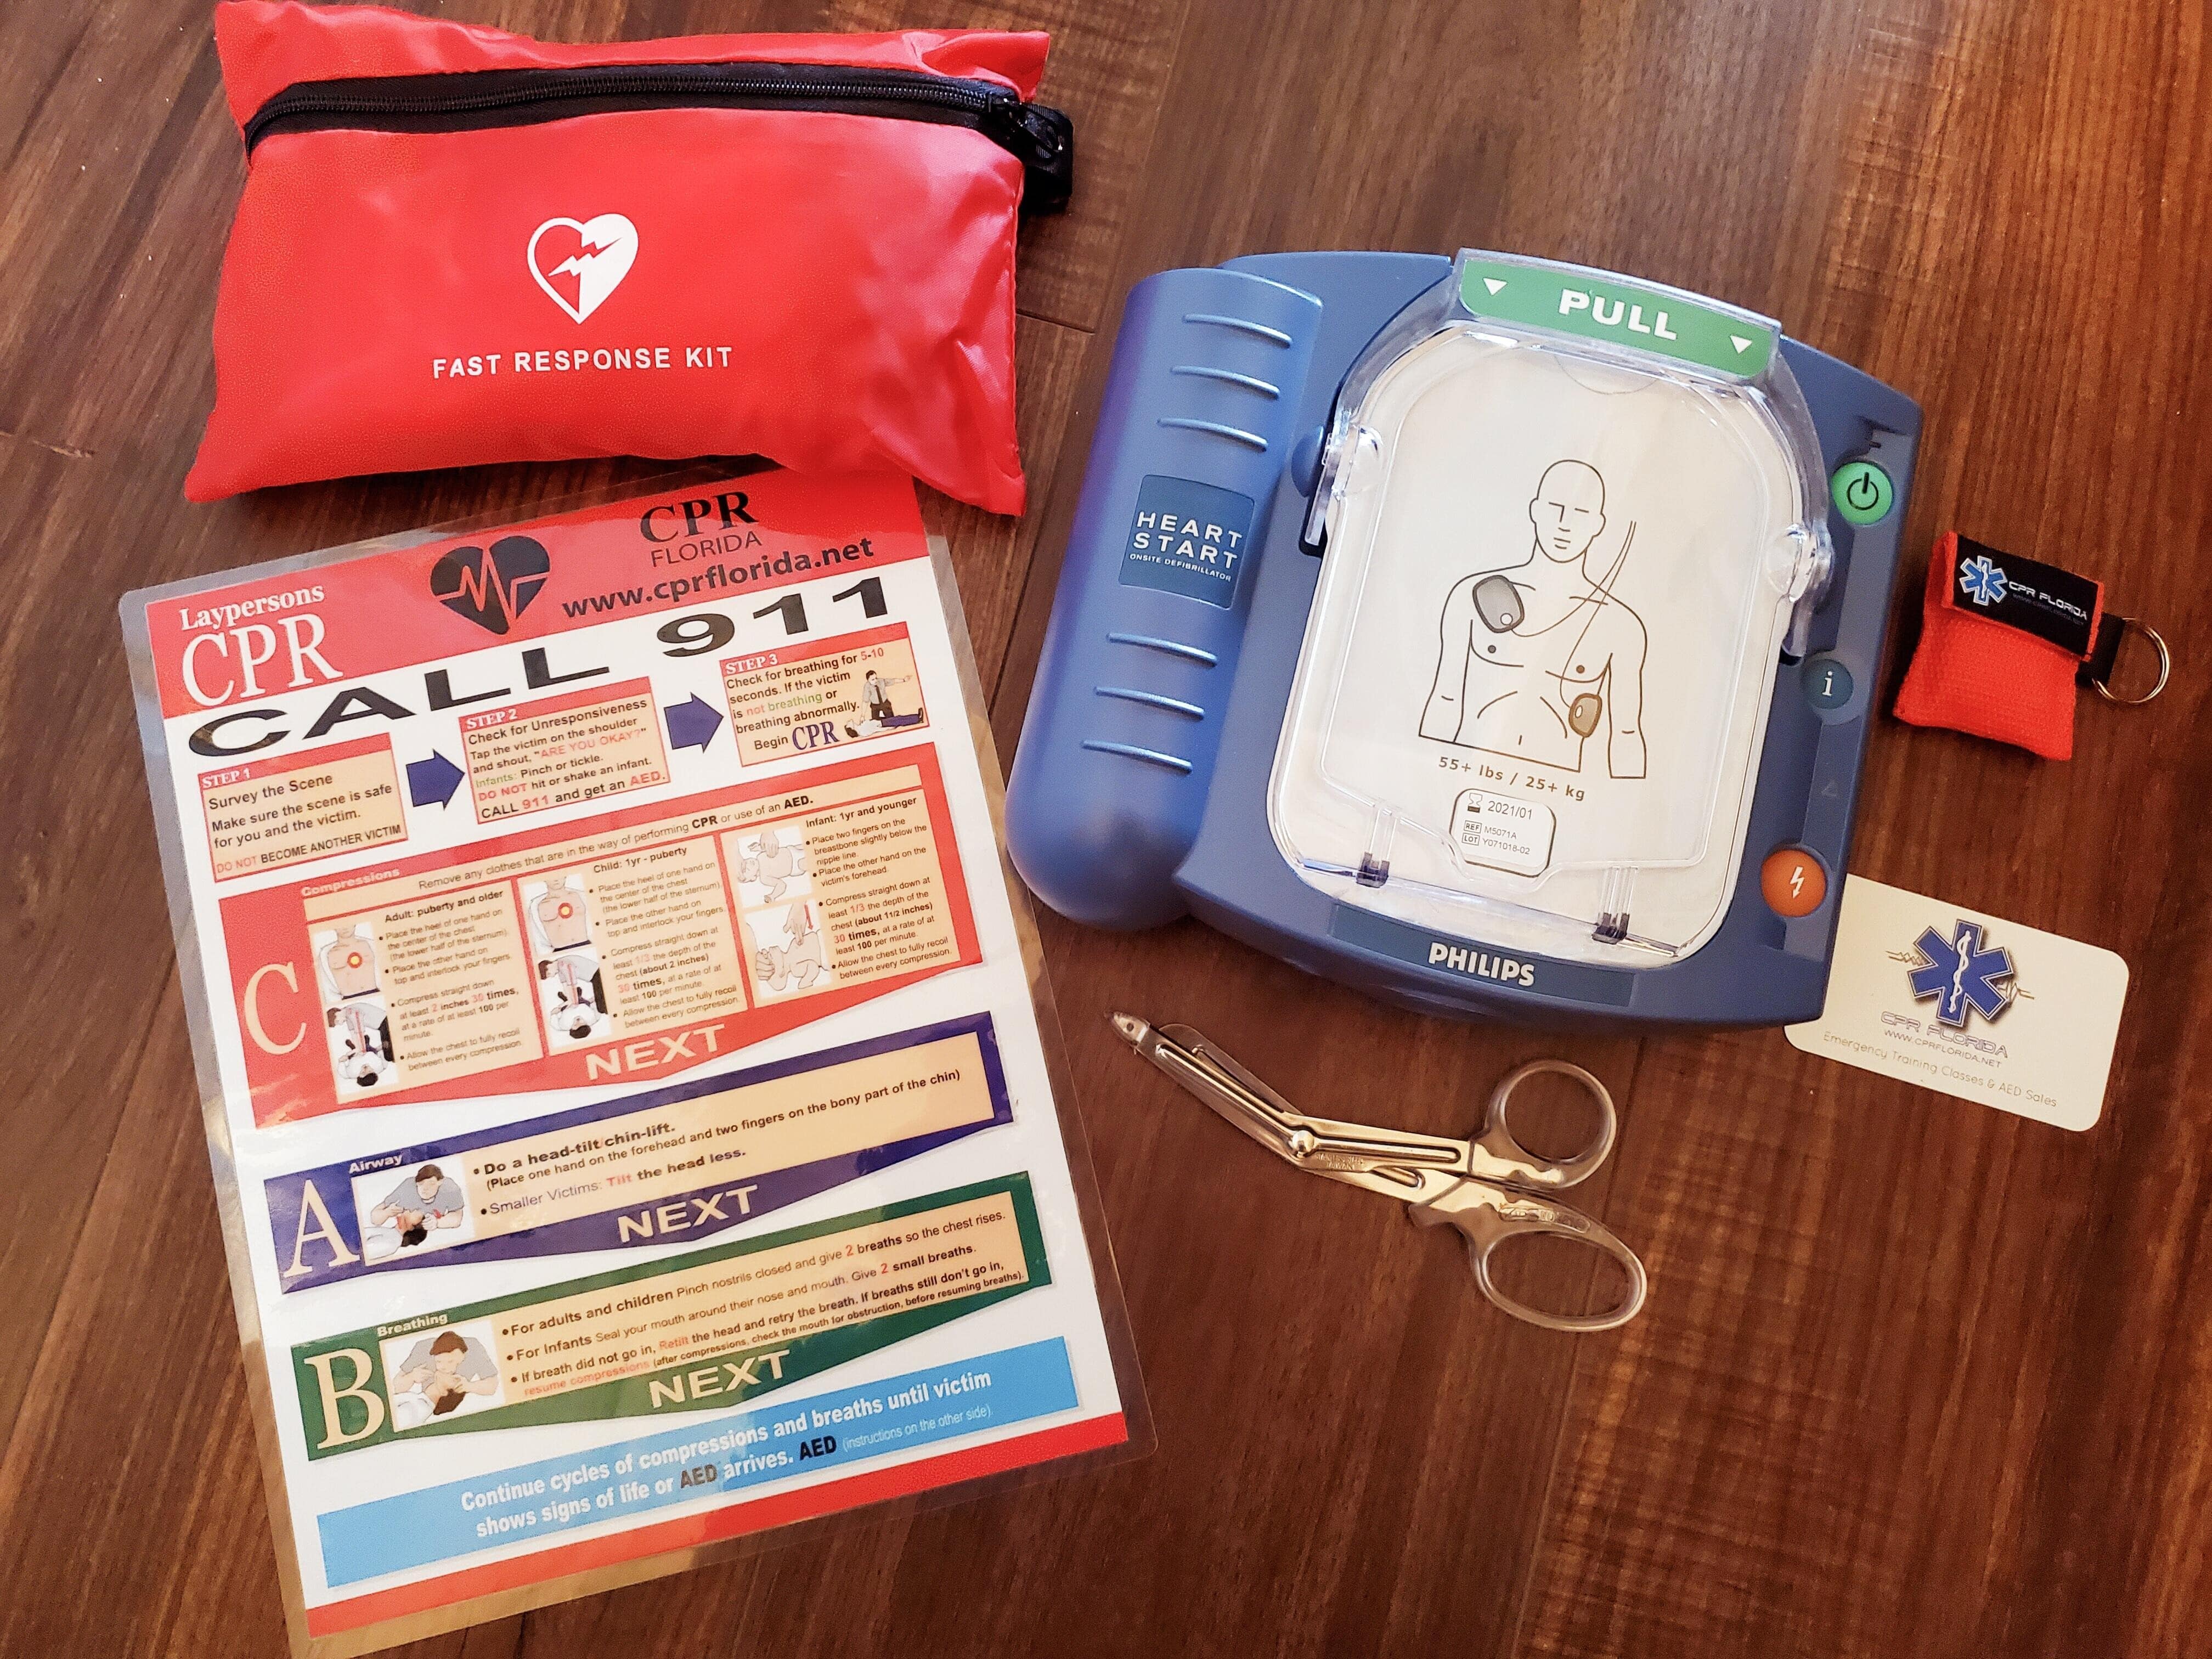 Philips Heartstart aed and carry case